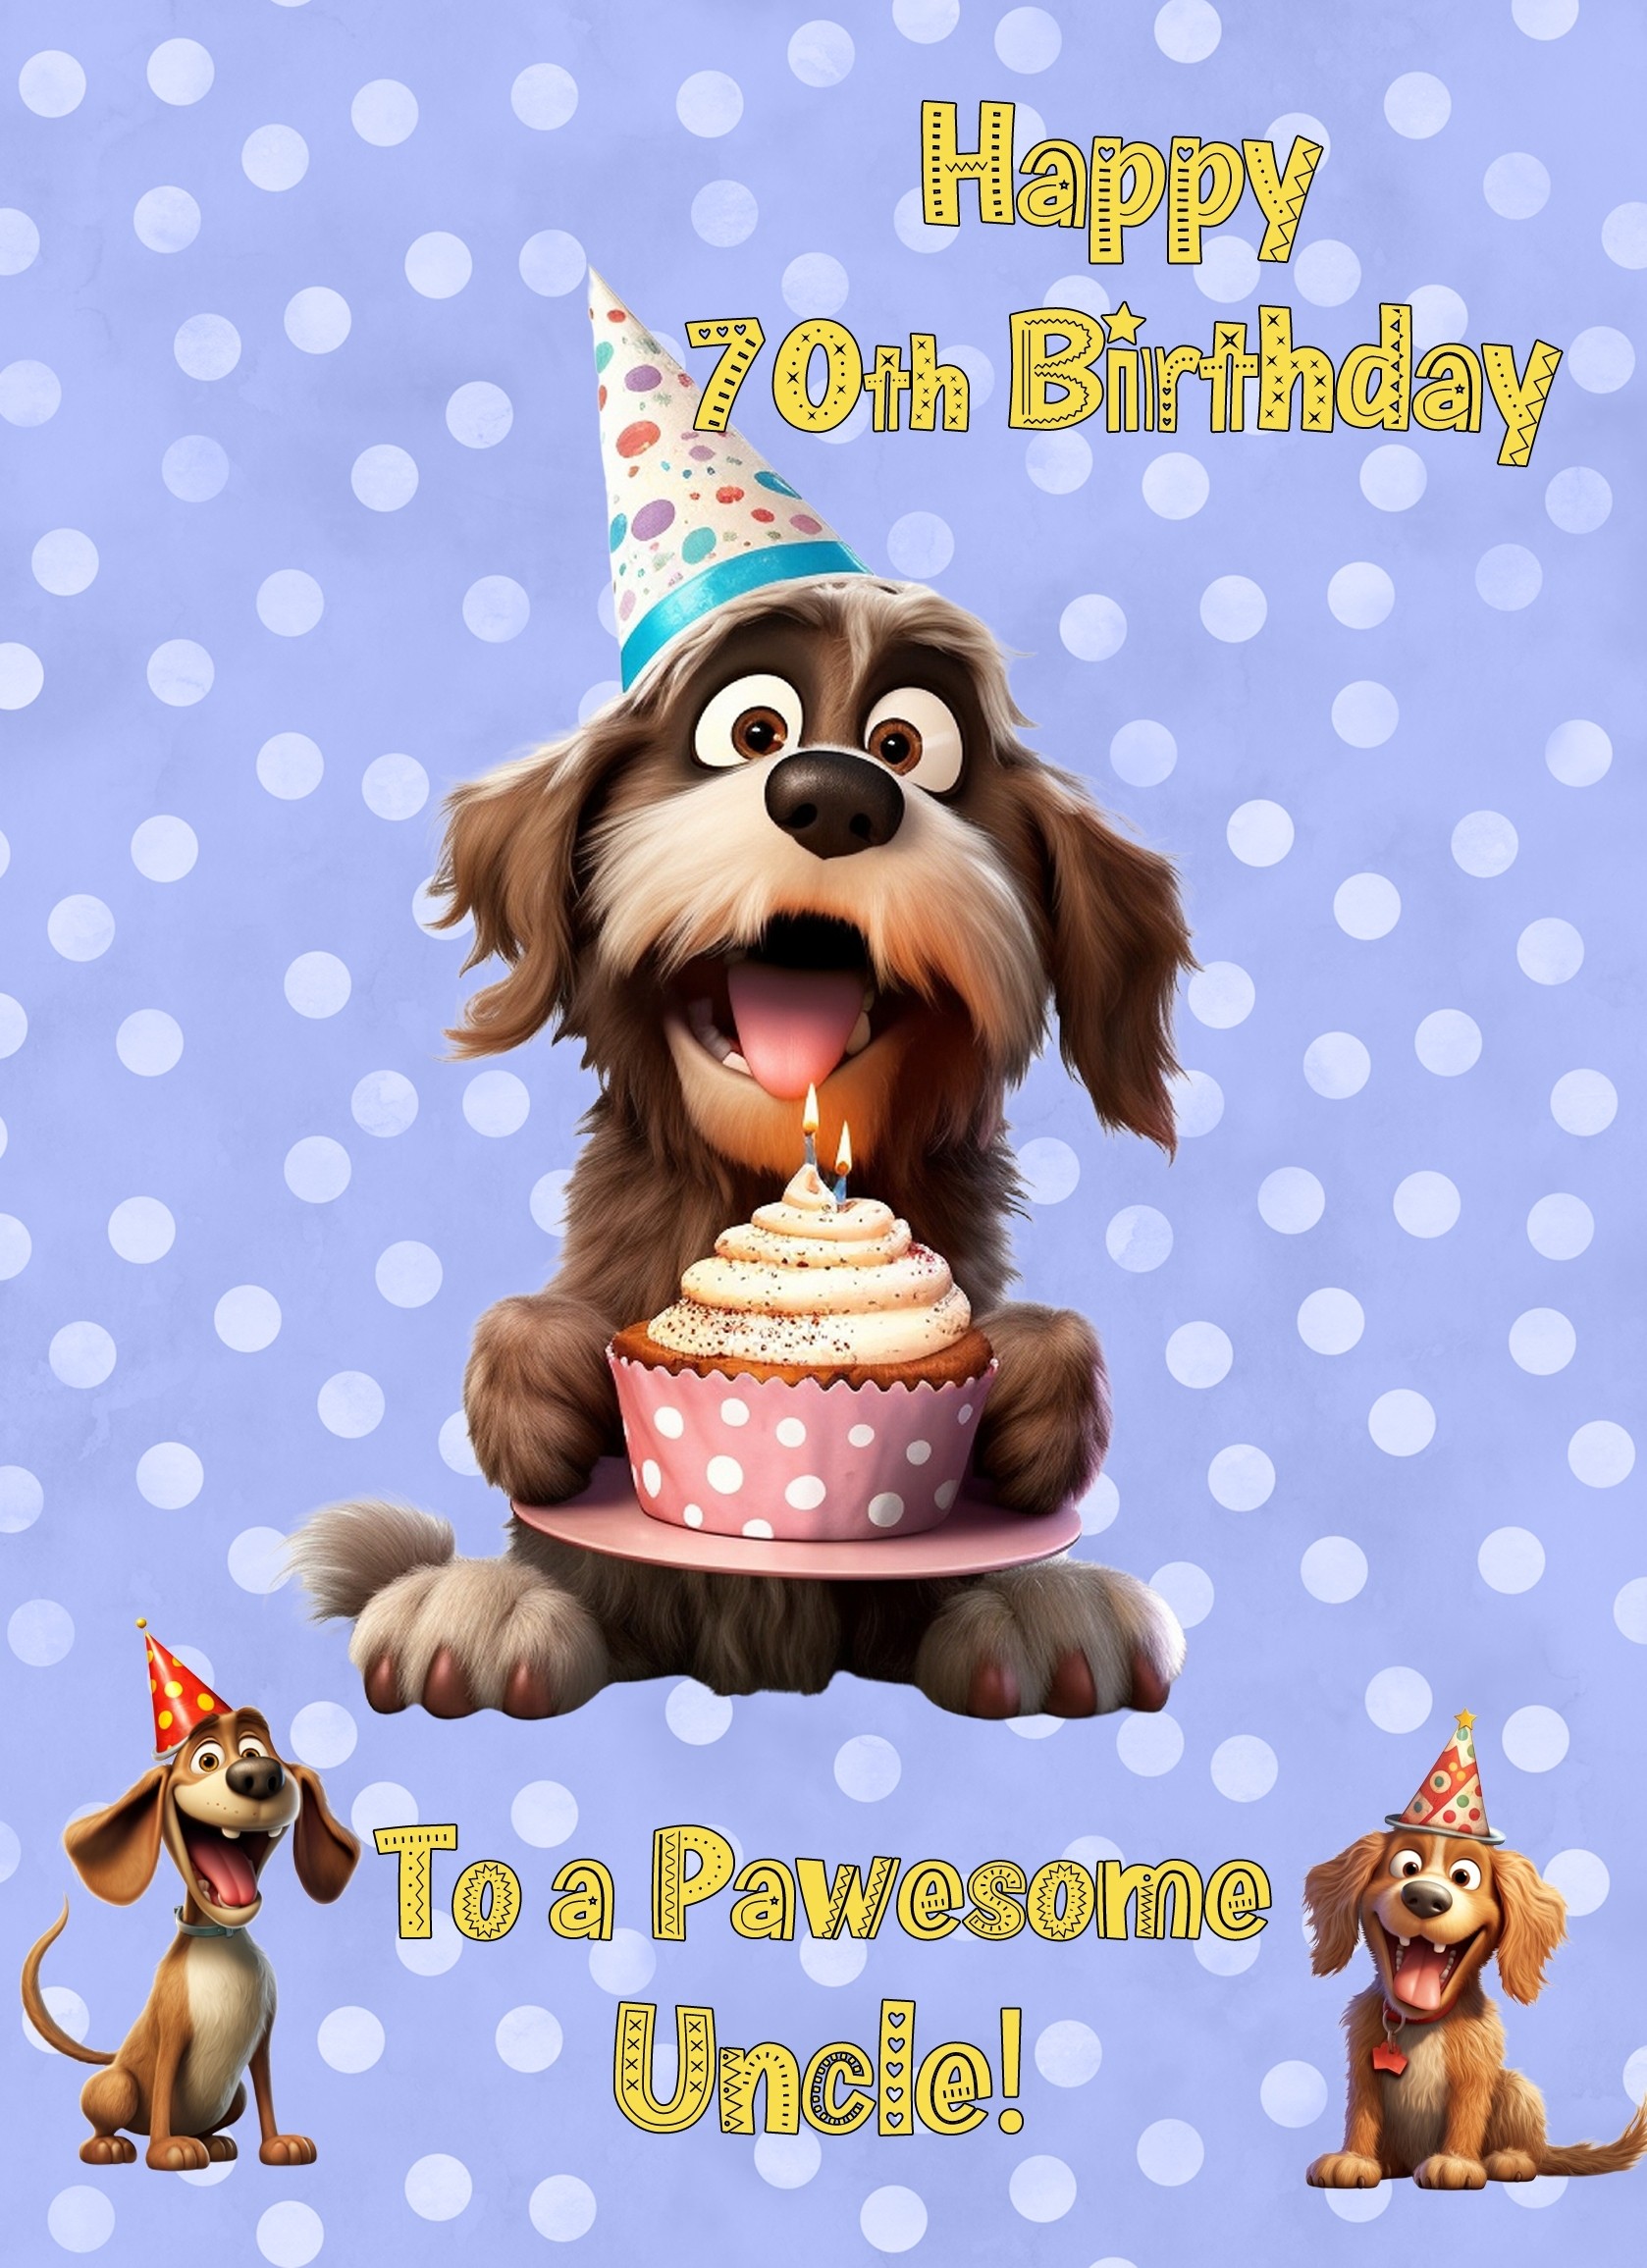 Uncle 70th Birthday Card (Funny Dog Humour)